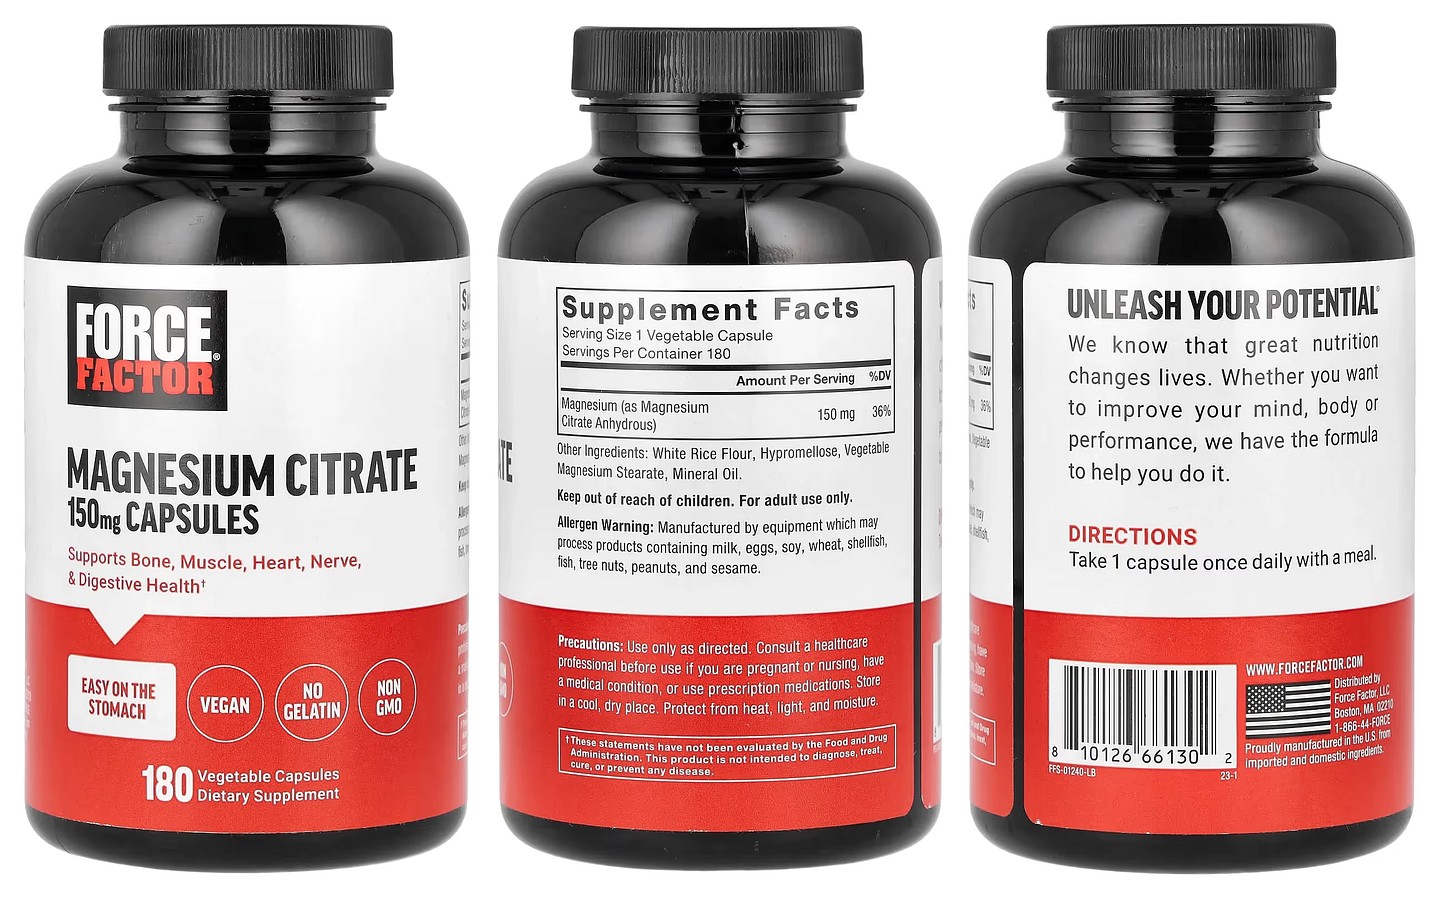 Force Factor, Magnesium Citrate packaging